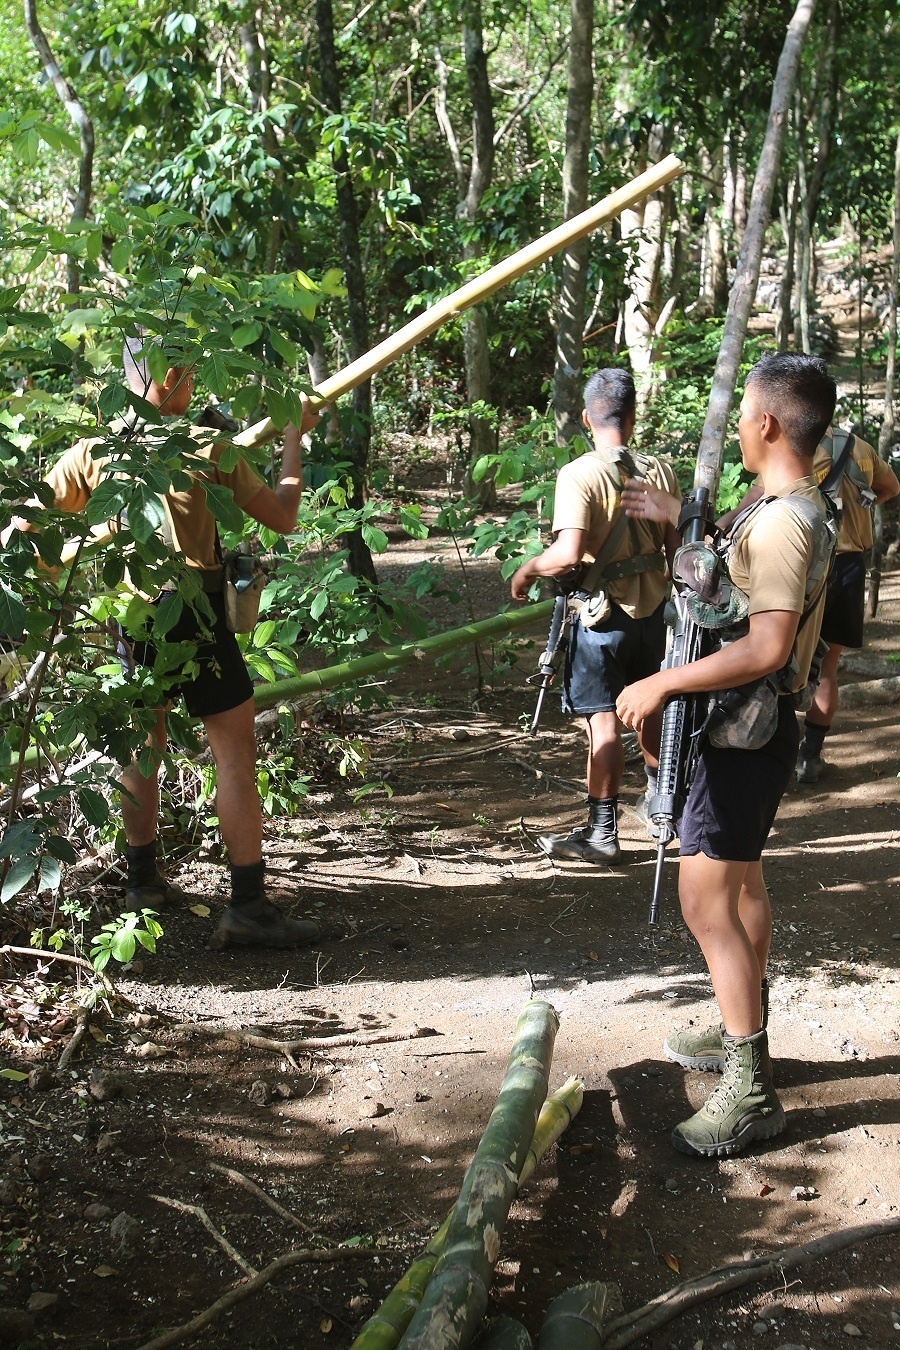 Welcome to the Jungle: Soldiers participate in survival training with Philippine Special Forces